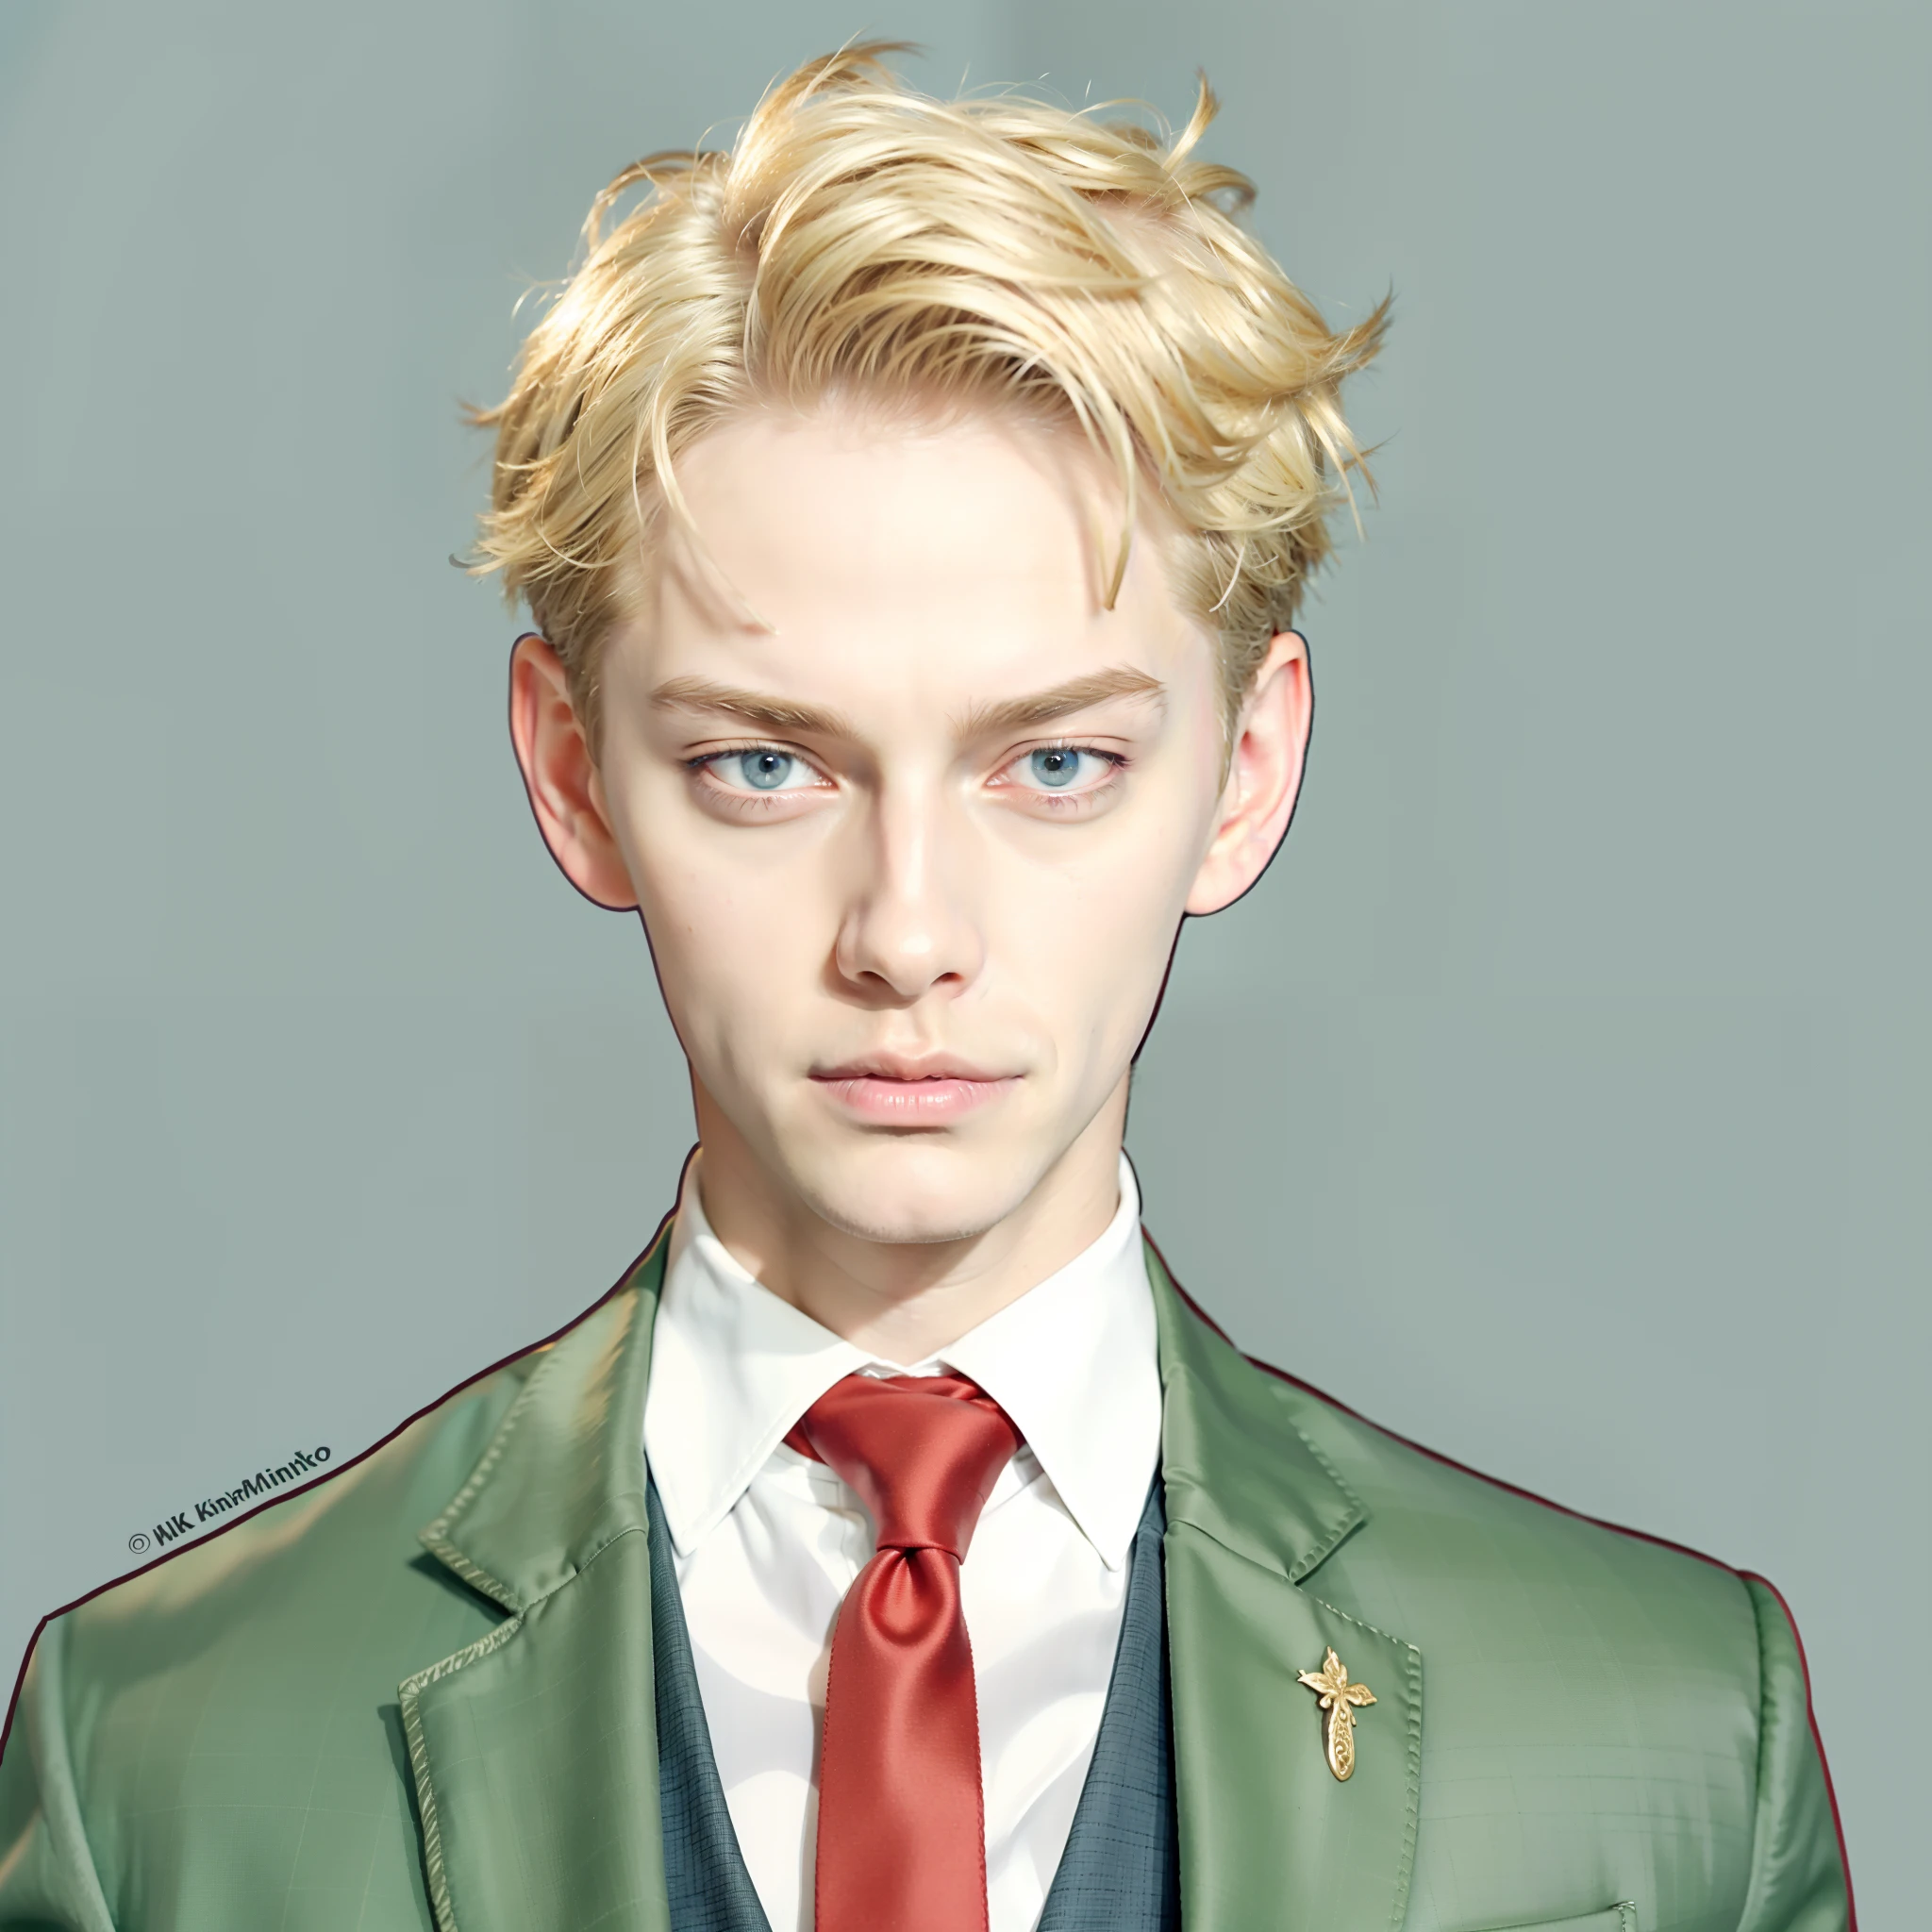 1boy with blonde hair and a red tie, loid forger, tall guy with blue eyes, handsome man, High quality image, masterpiece, detailed hair texture, detailed skin texture, detailed cloth texture, 8k, add fabric details, ultra detailed skin texture, ultra detailed photo, skin pores, cloth details, high skin details, realistic hair details